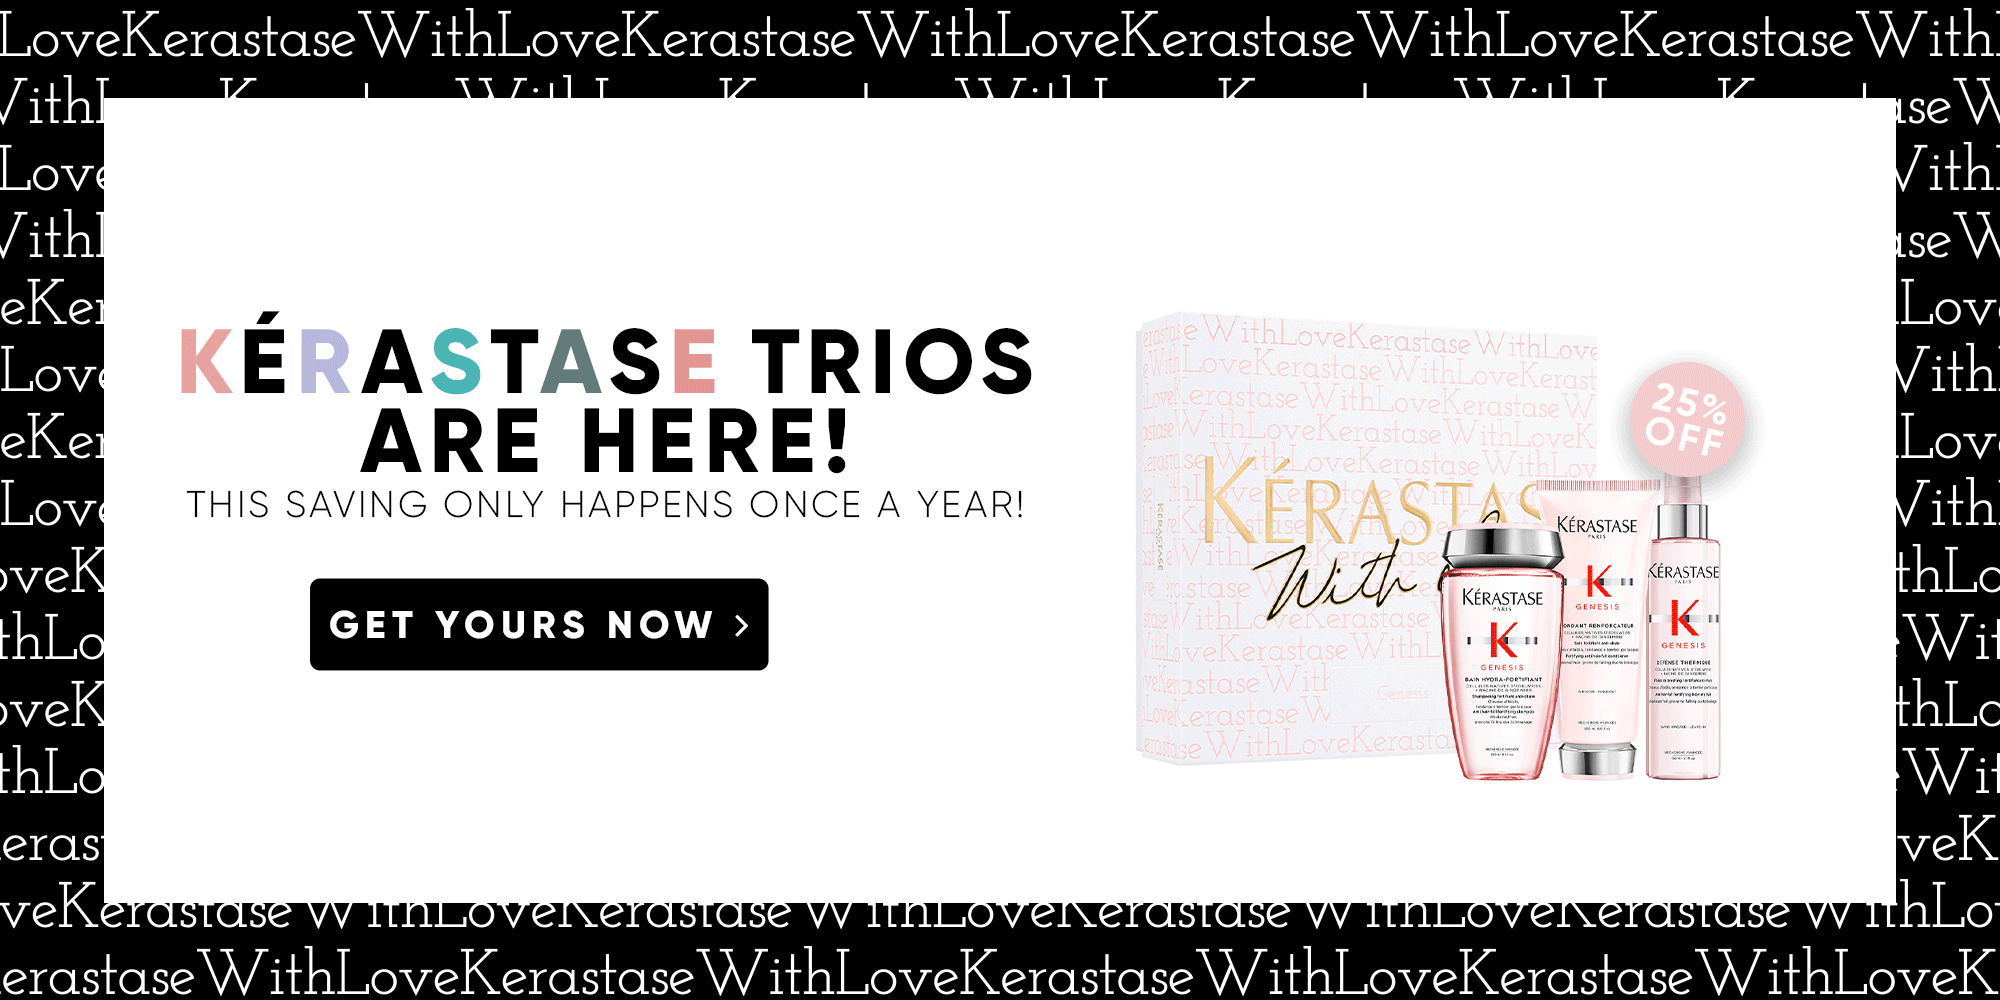 Kérastase trios are here! This saving only happens once a year! Get yours now